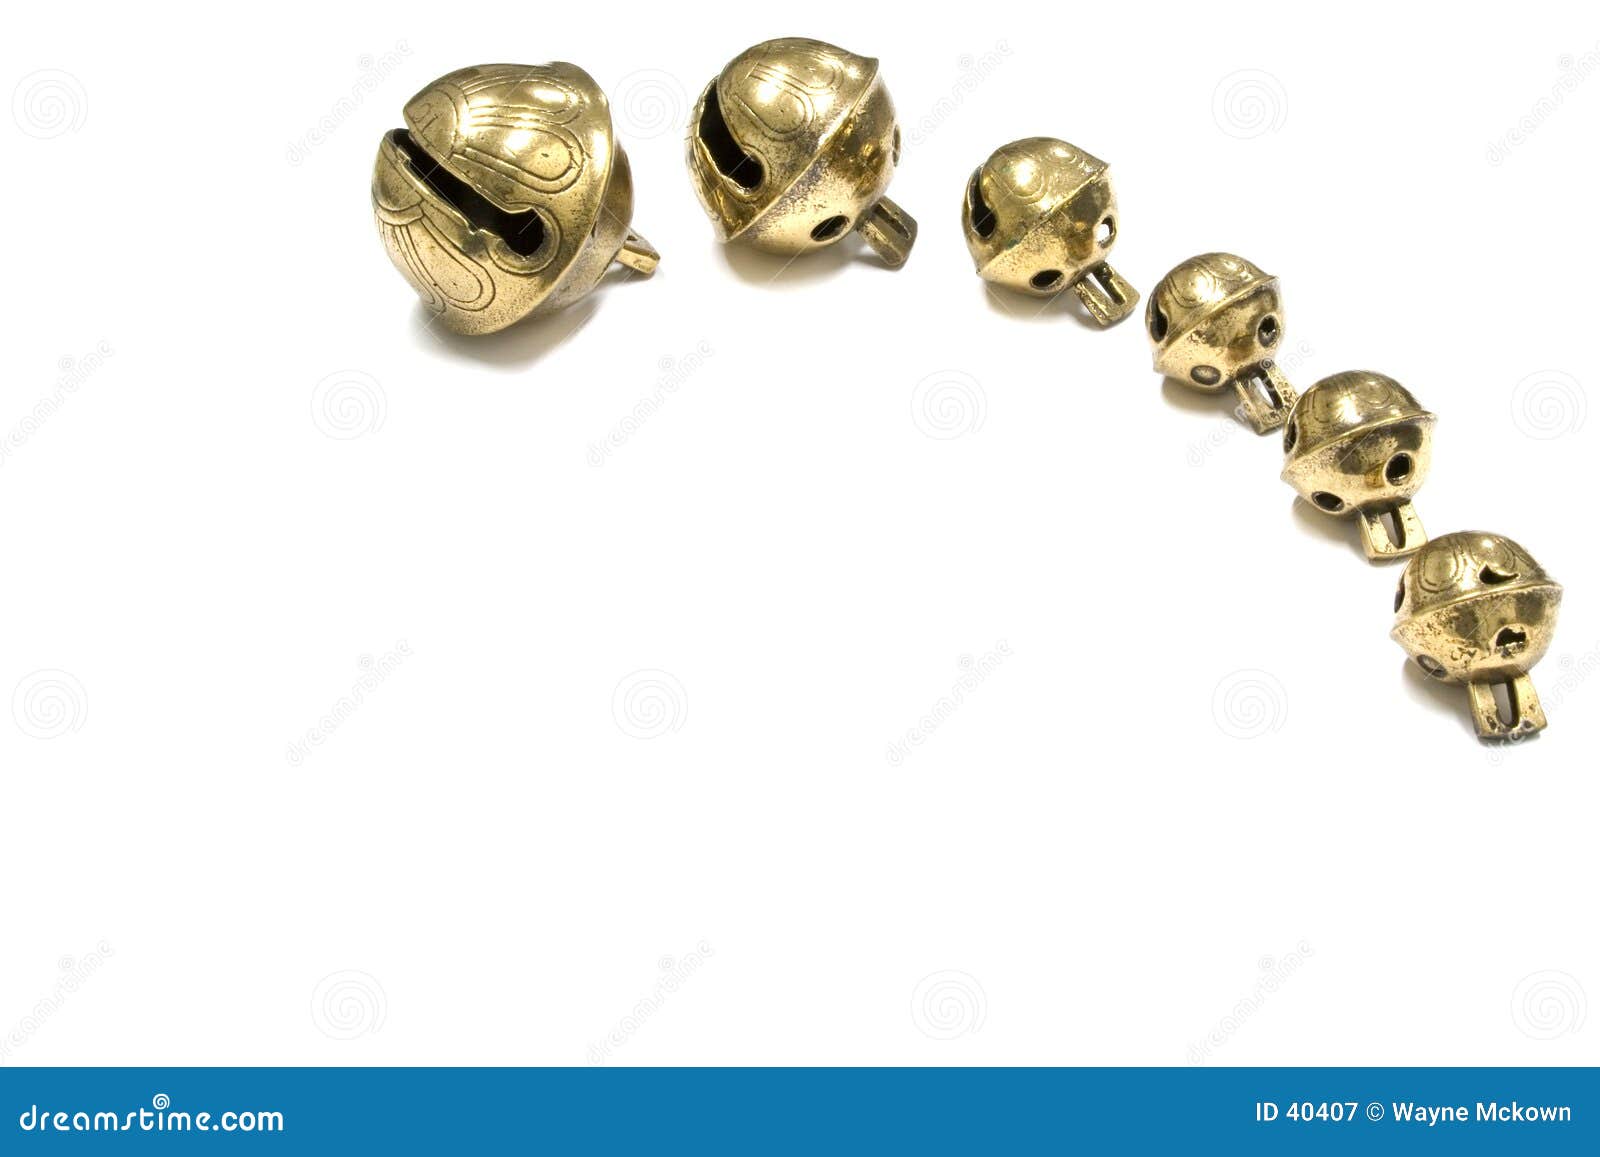 Six Antique Sleigh Bells. Royalty Free Stock Photography 